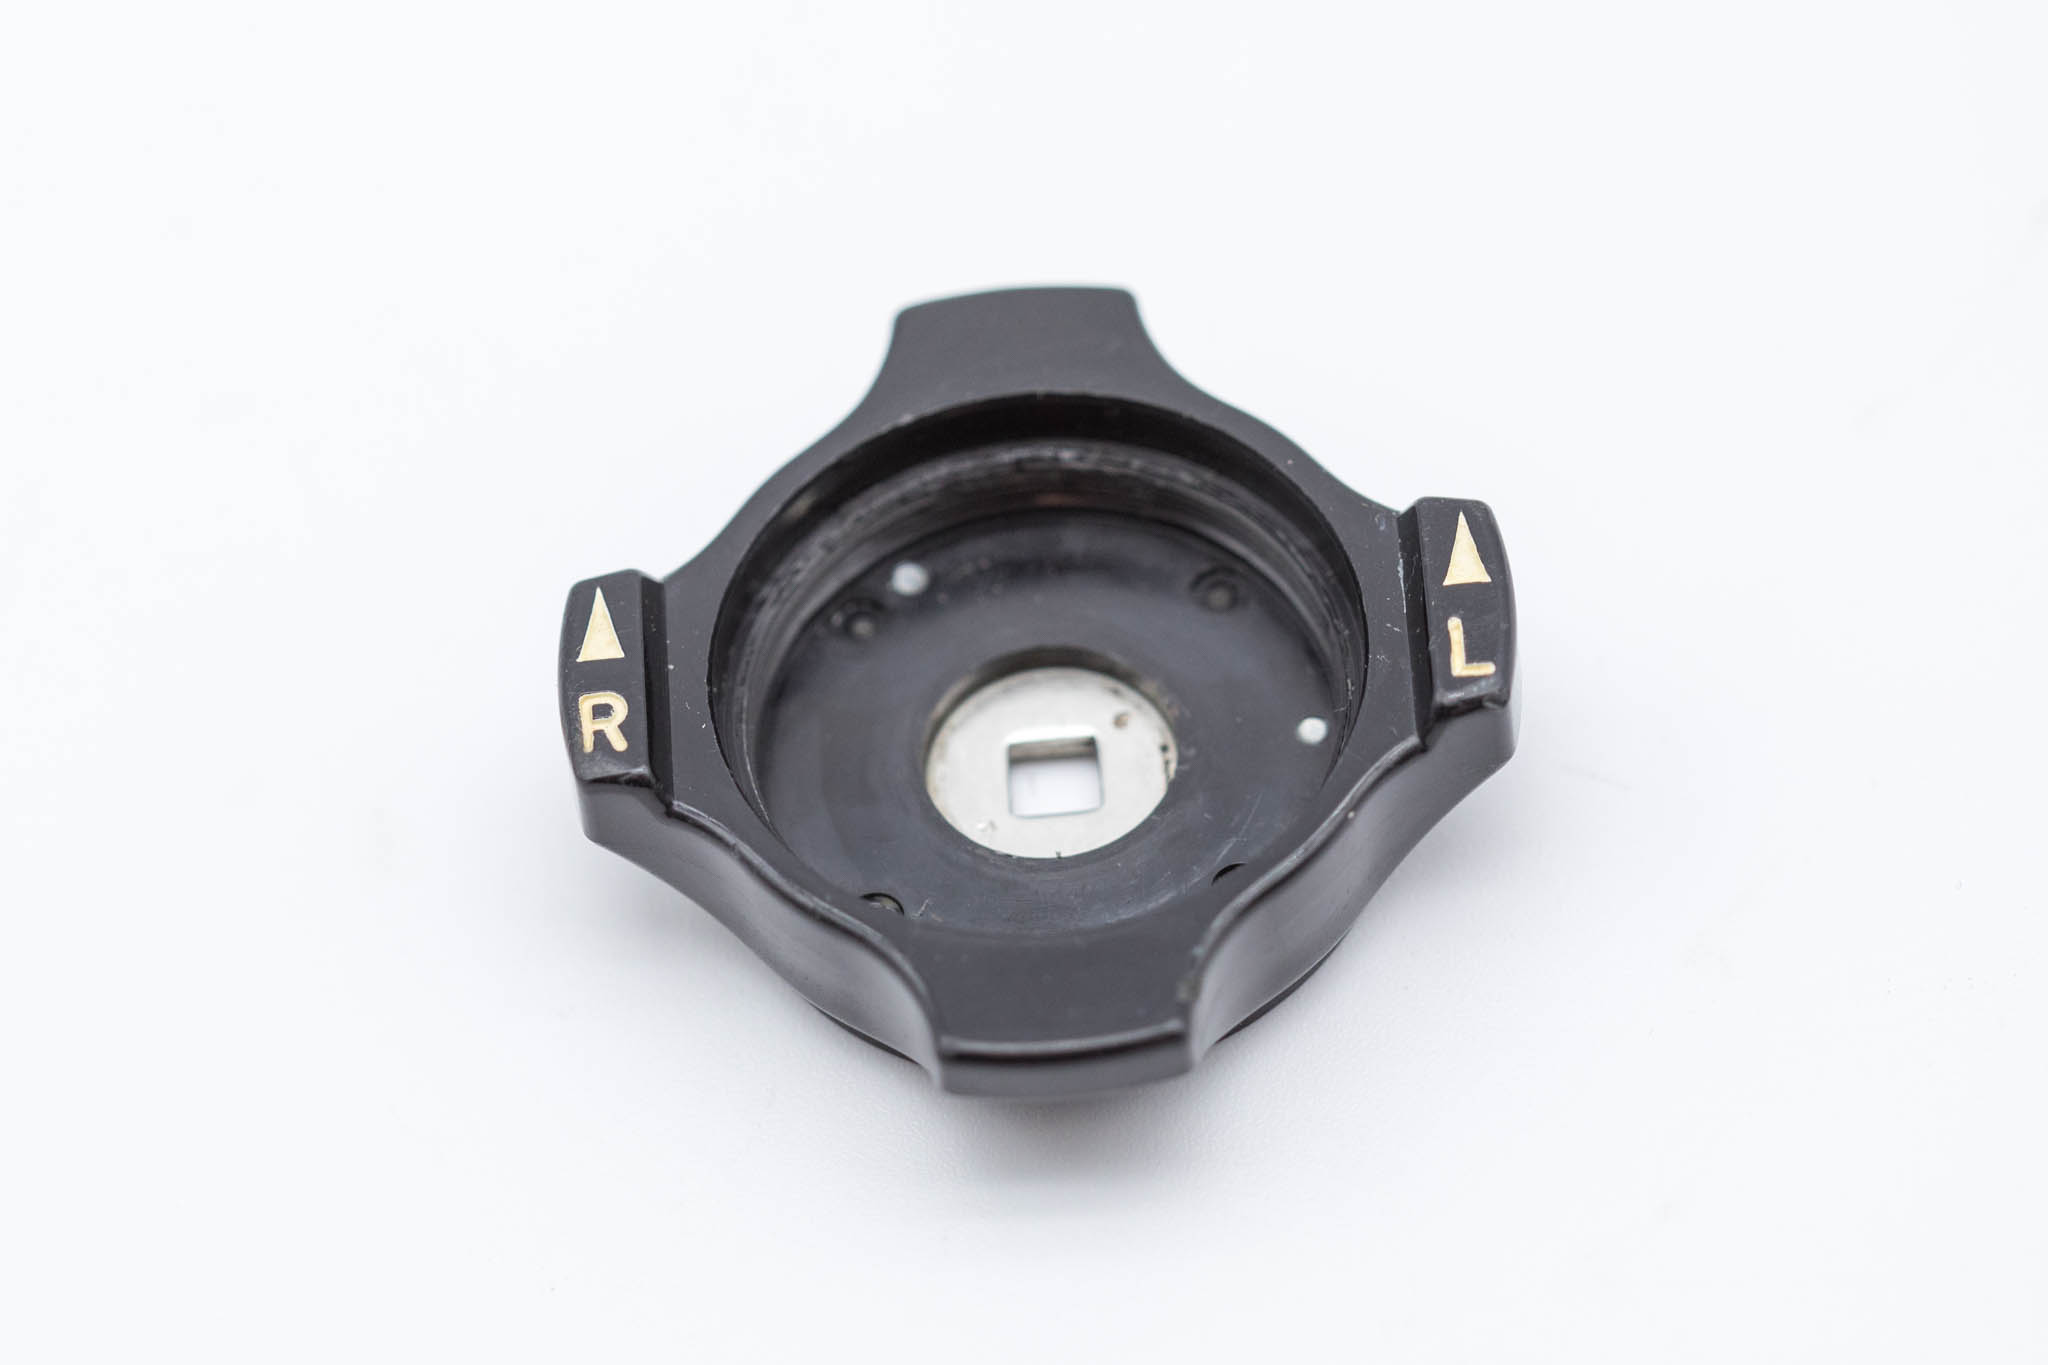 OEM Control Knob (Left/Right) Shaft Cover - 20, 30, 100, 130 Series